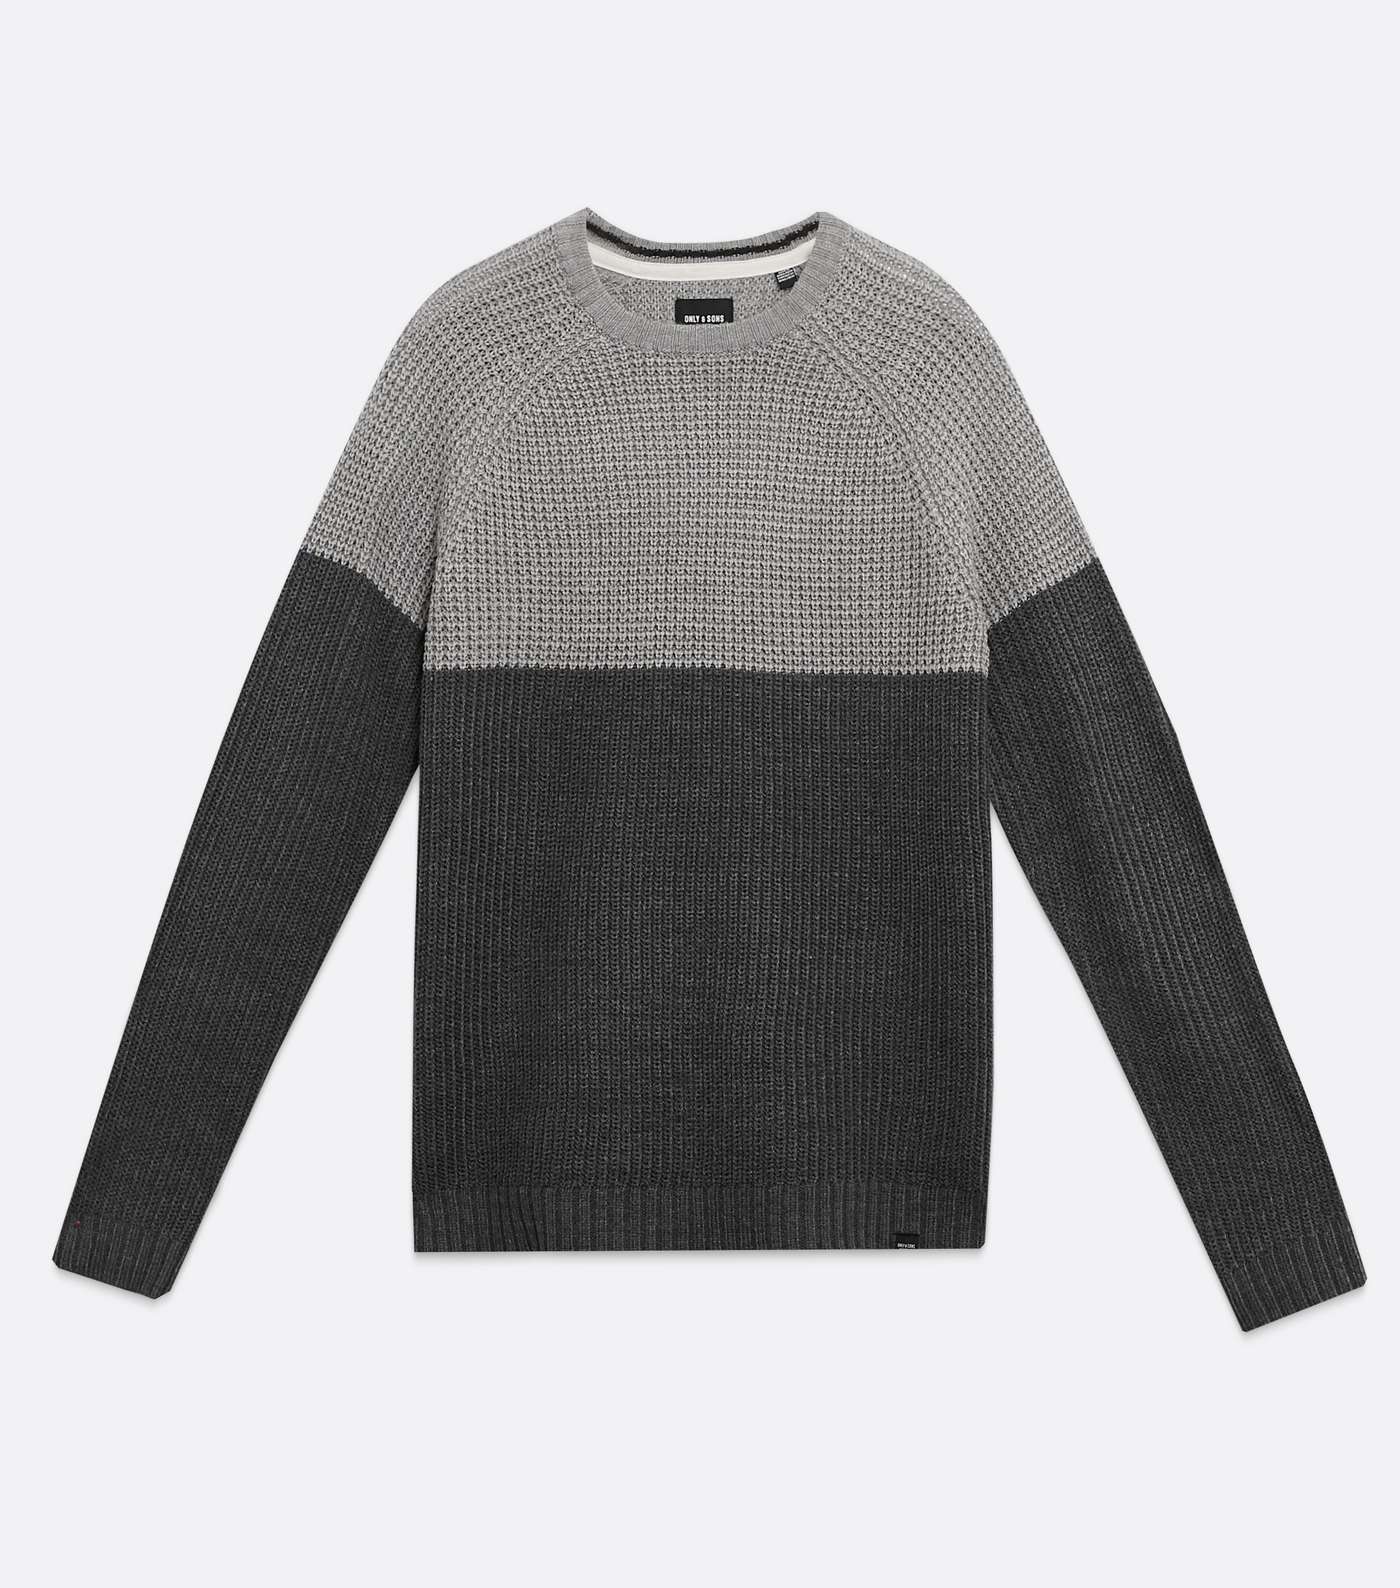 Only & Sons Grey Marl Crew Long Sleeve Jumper Image 5